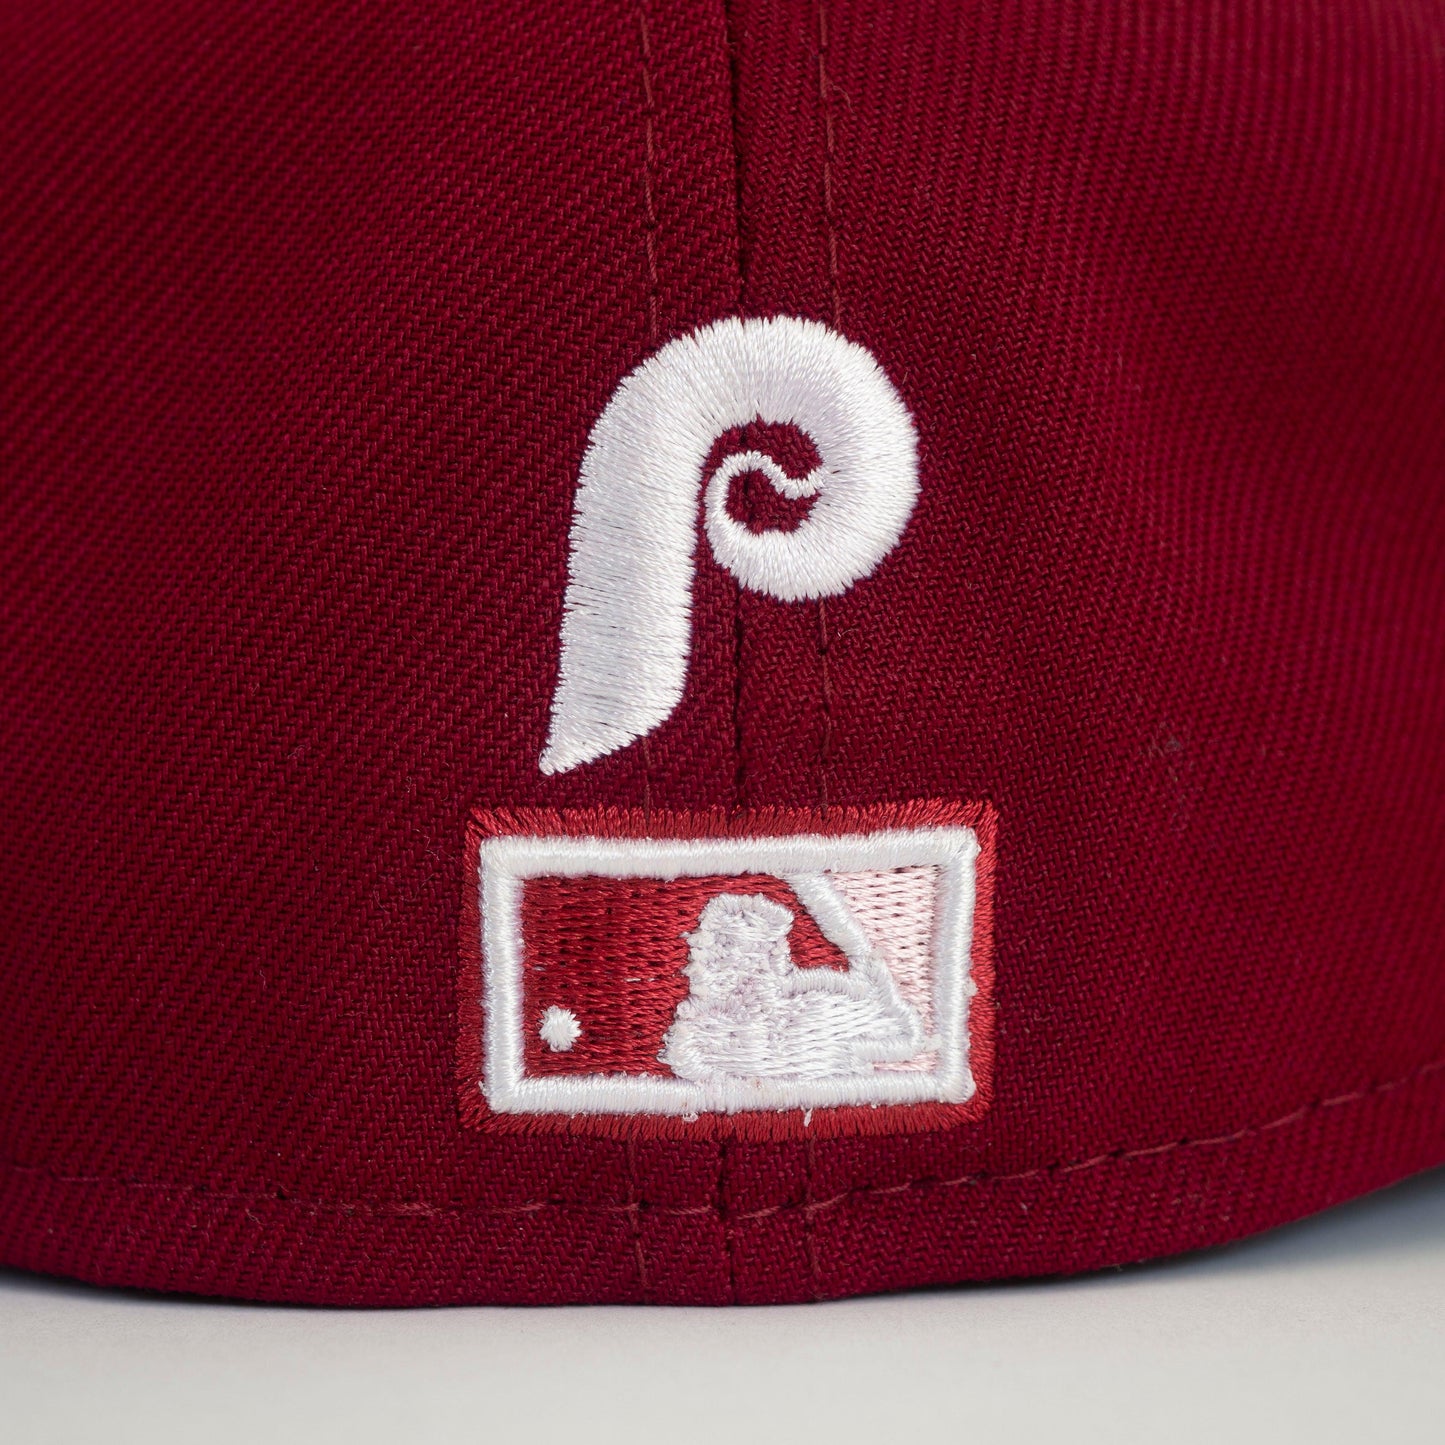 NEW ERA 59FIFTY MLB PHILADELPHIA PHILLIES SIDE PATCH BLOOM CARDINAL / PINK UV FITTED CAP